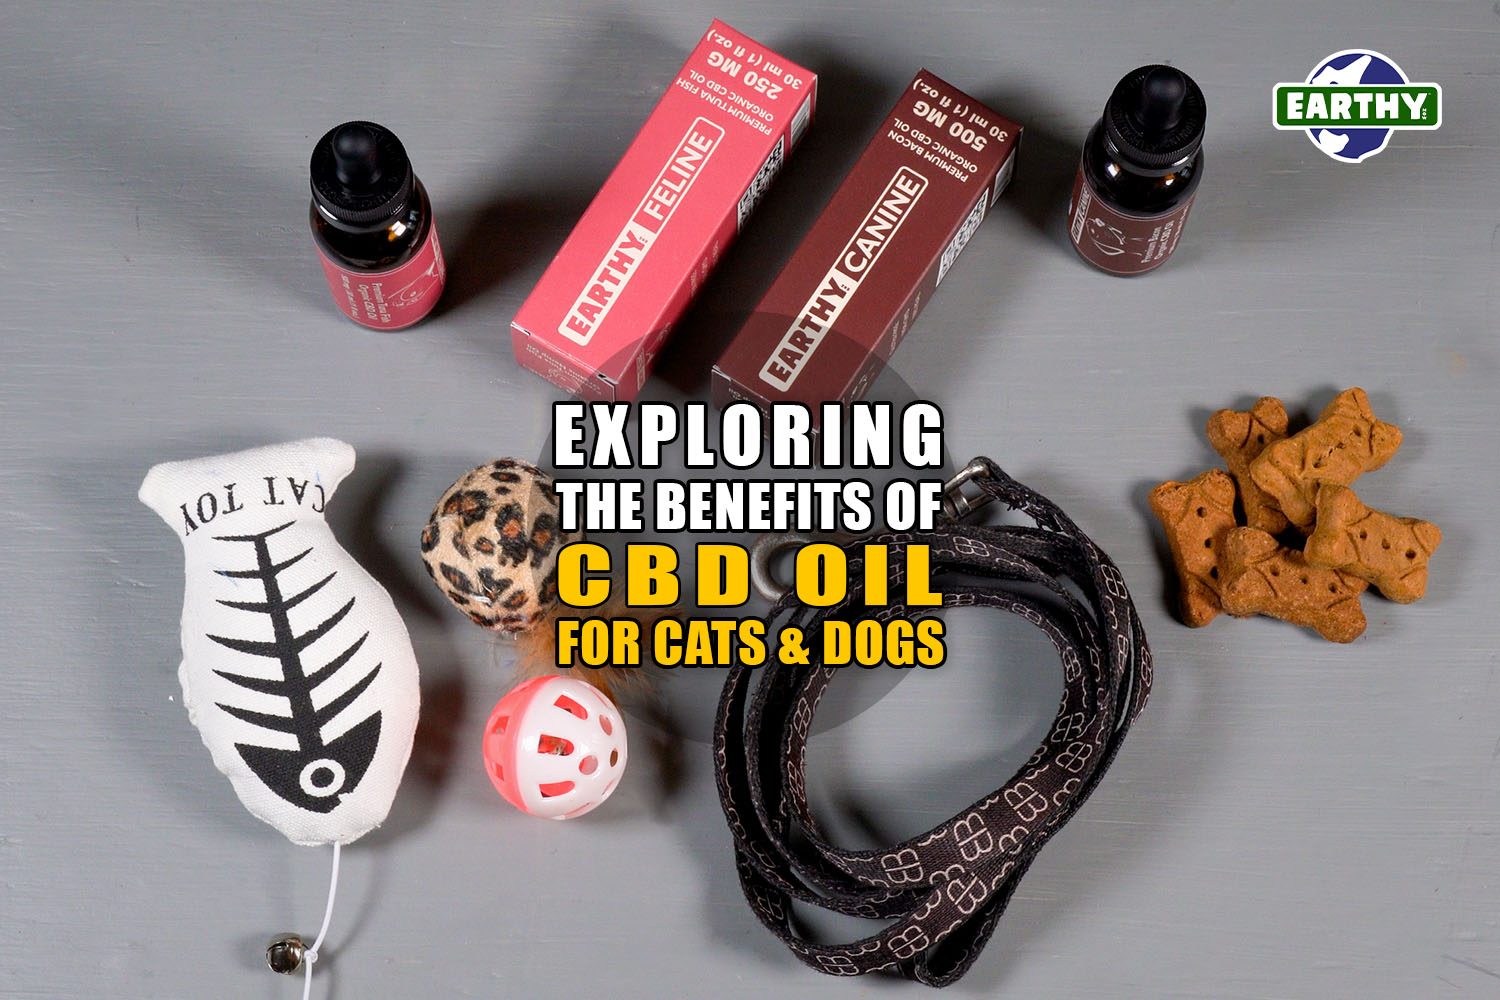 Exploring the Benefits of CBD Oil for Cats and Dogs | Earthy now